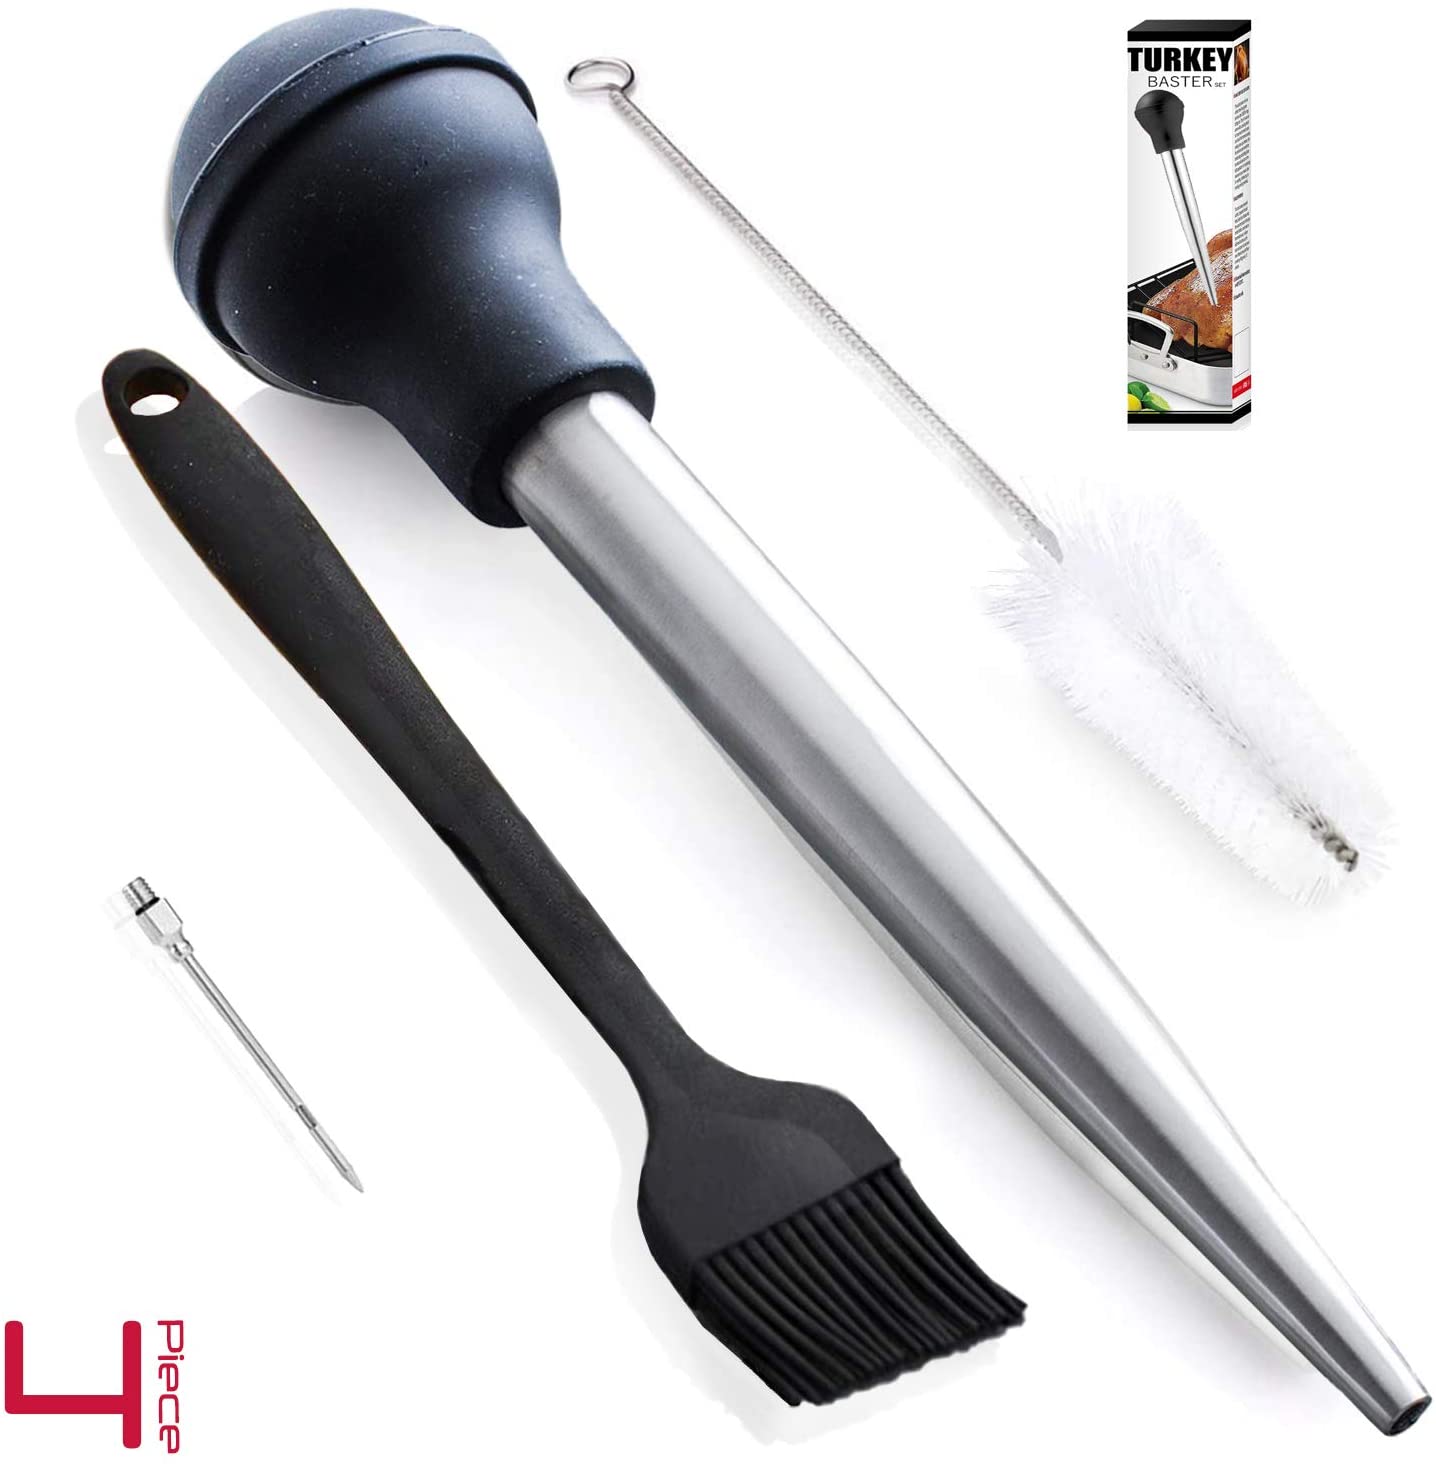 Stainless Steel Turkey Baster w/ Injector Needle & Cleaning Brush (11)